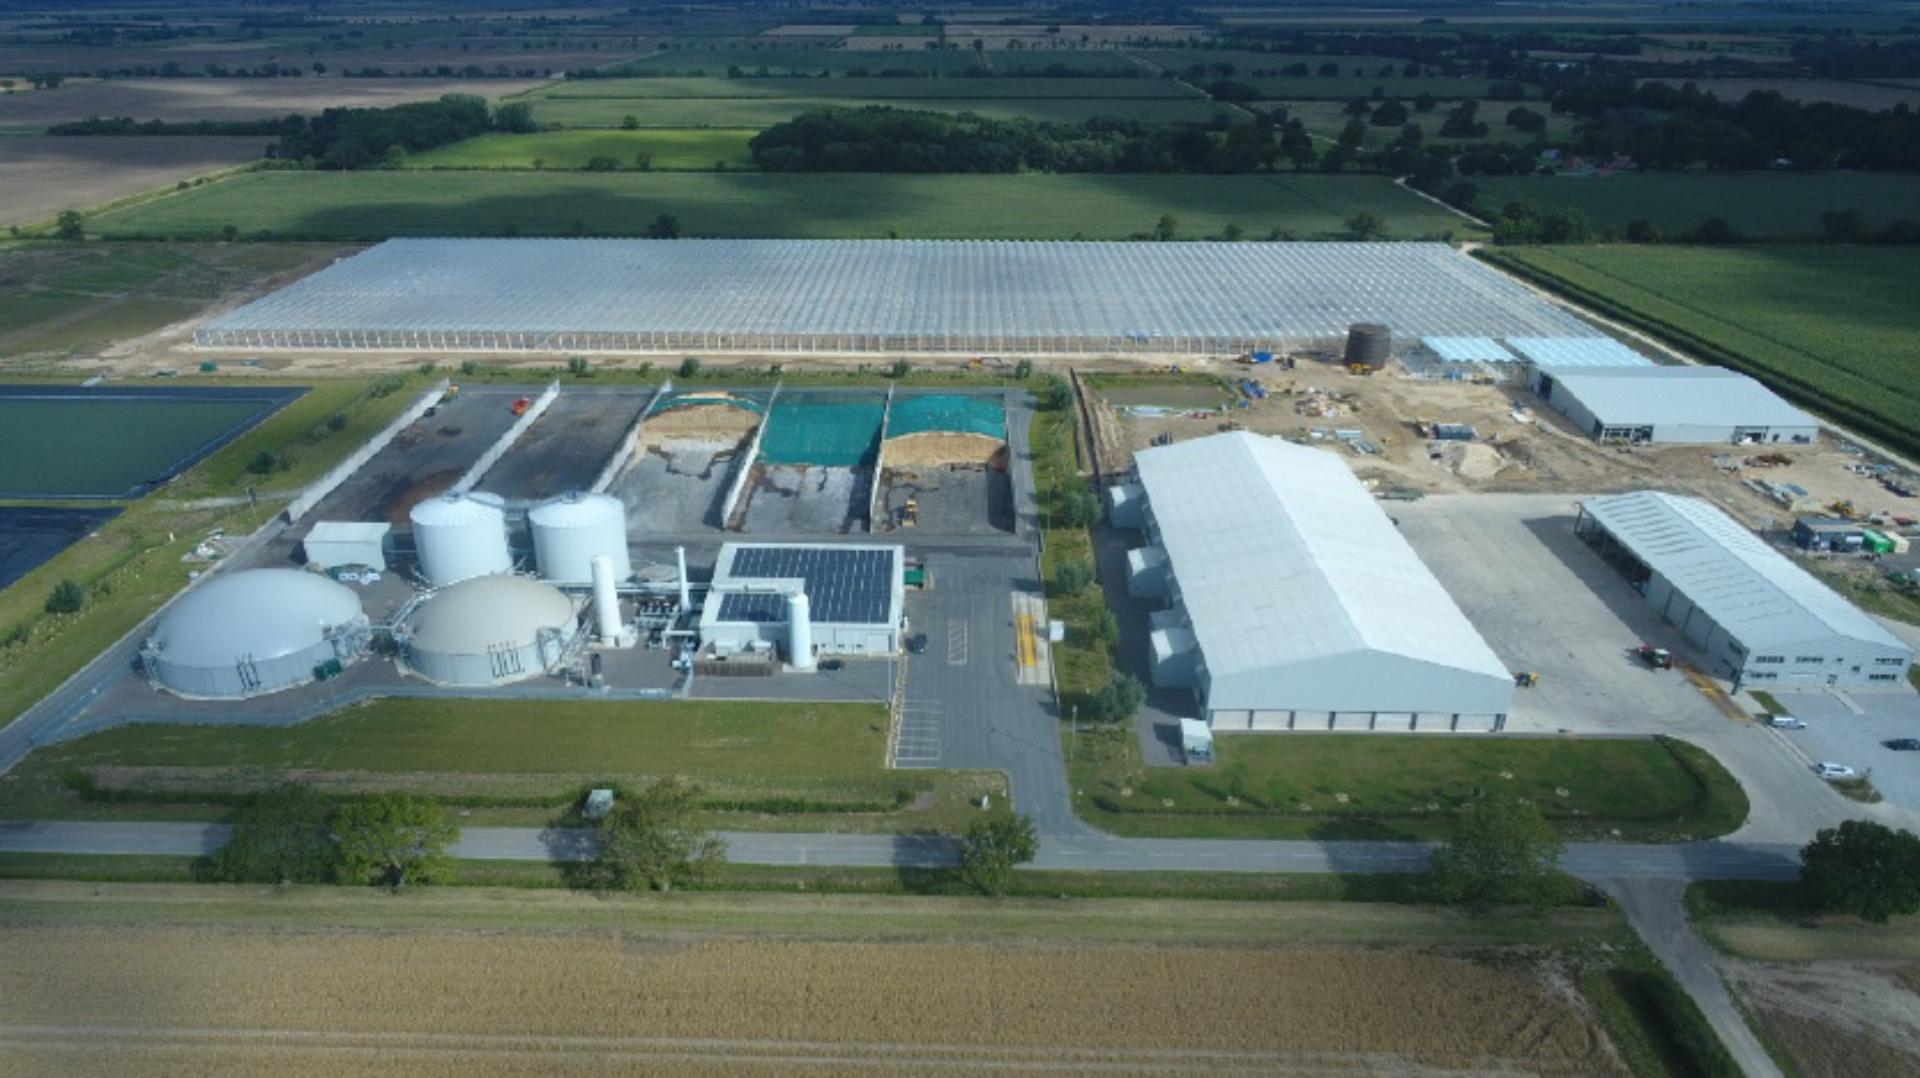 Aerial view of the anaerobic digester at Carrington, Lincolnshire